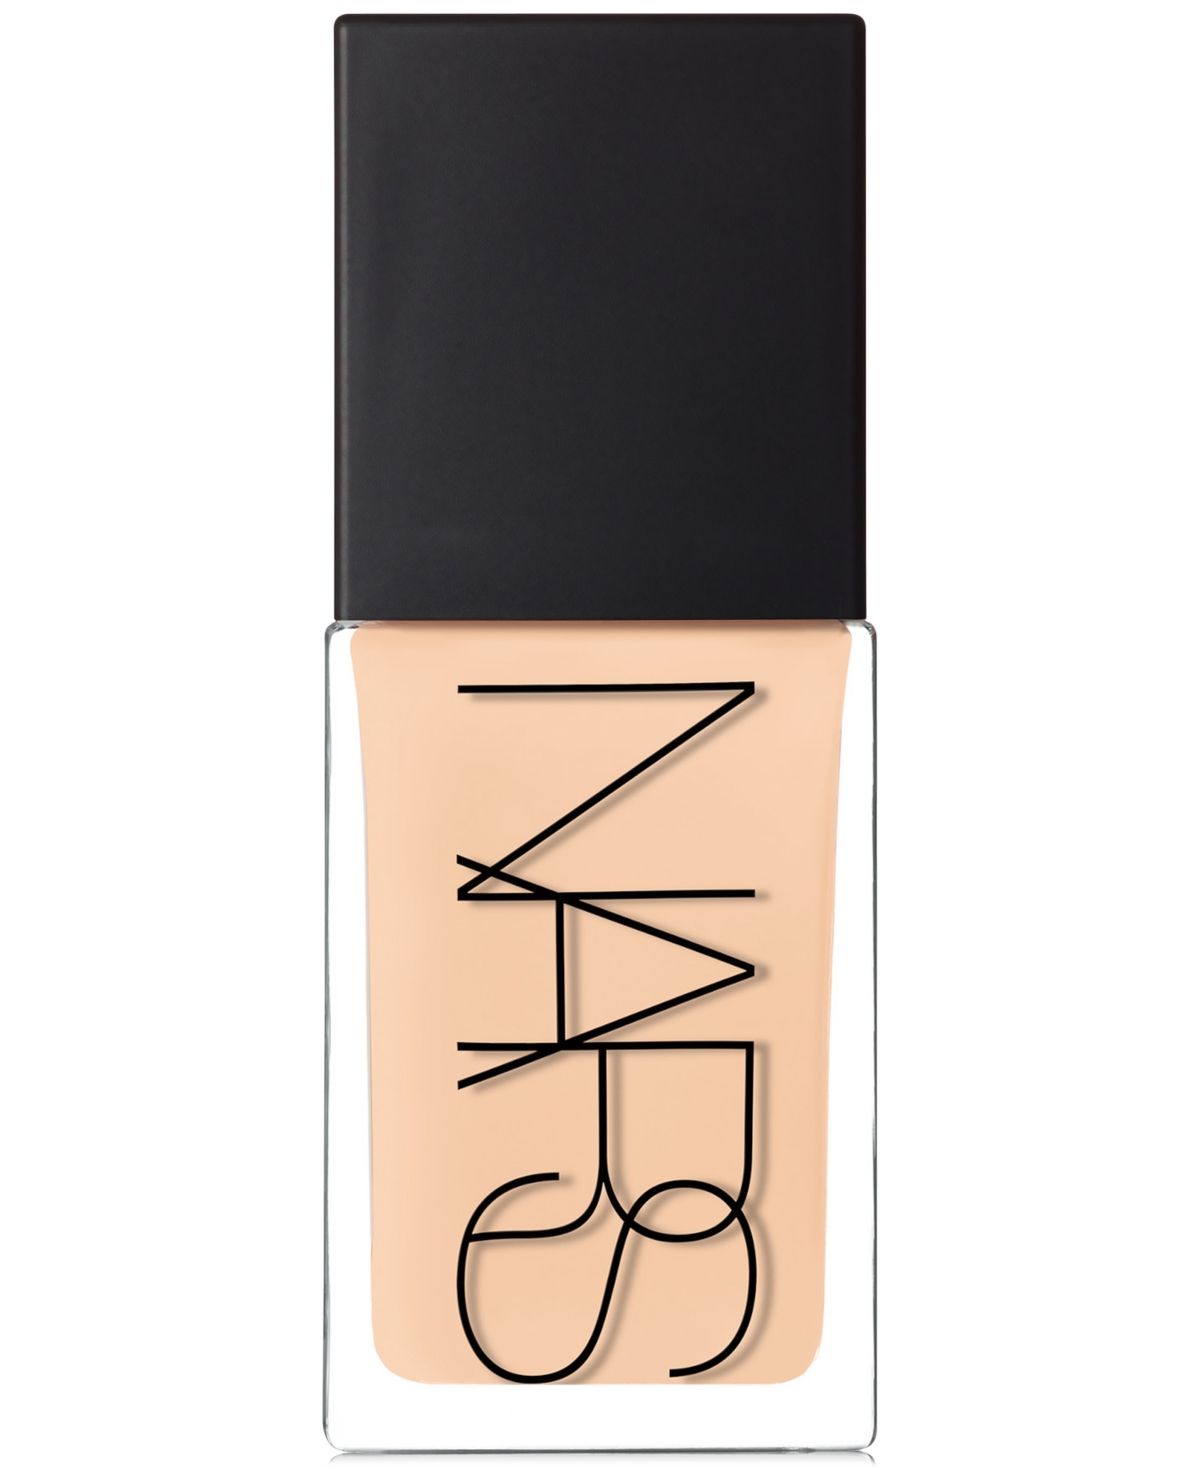 Nars Light Reflecting Foundation In Vienna (l. - Light With Cool Undertones)